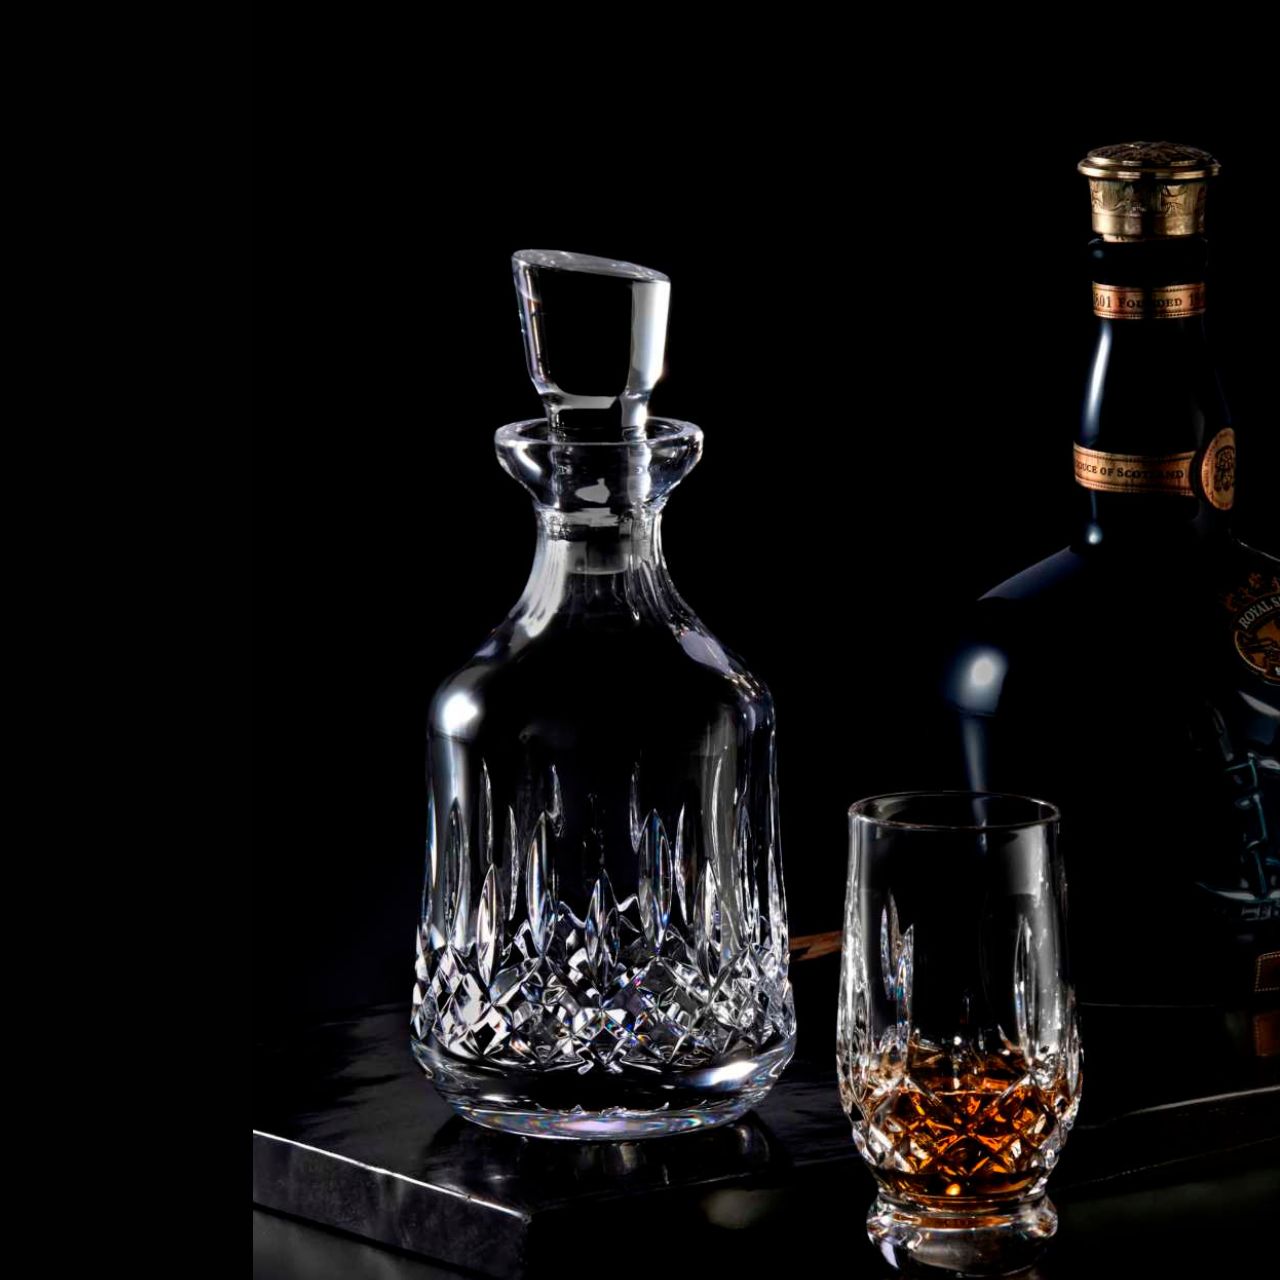 Waterford Crystal Lismore Bottle Shaped Decanter  By Waterford Crystal, Based on the world’s best-selling Lismore crystal pattern famous for its signature diamond and wedge cuts, the Lismore Gift Bar Collection has been inspired by the rich heritage of Ireland and reimagined in a modern way with pieces designed to be used and enjoyed.